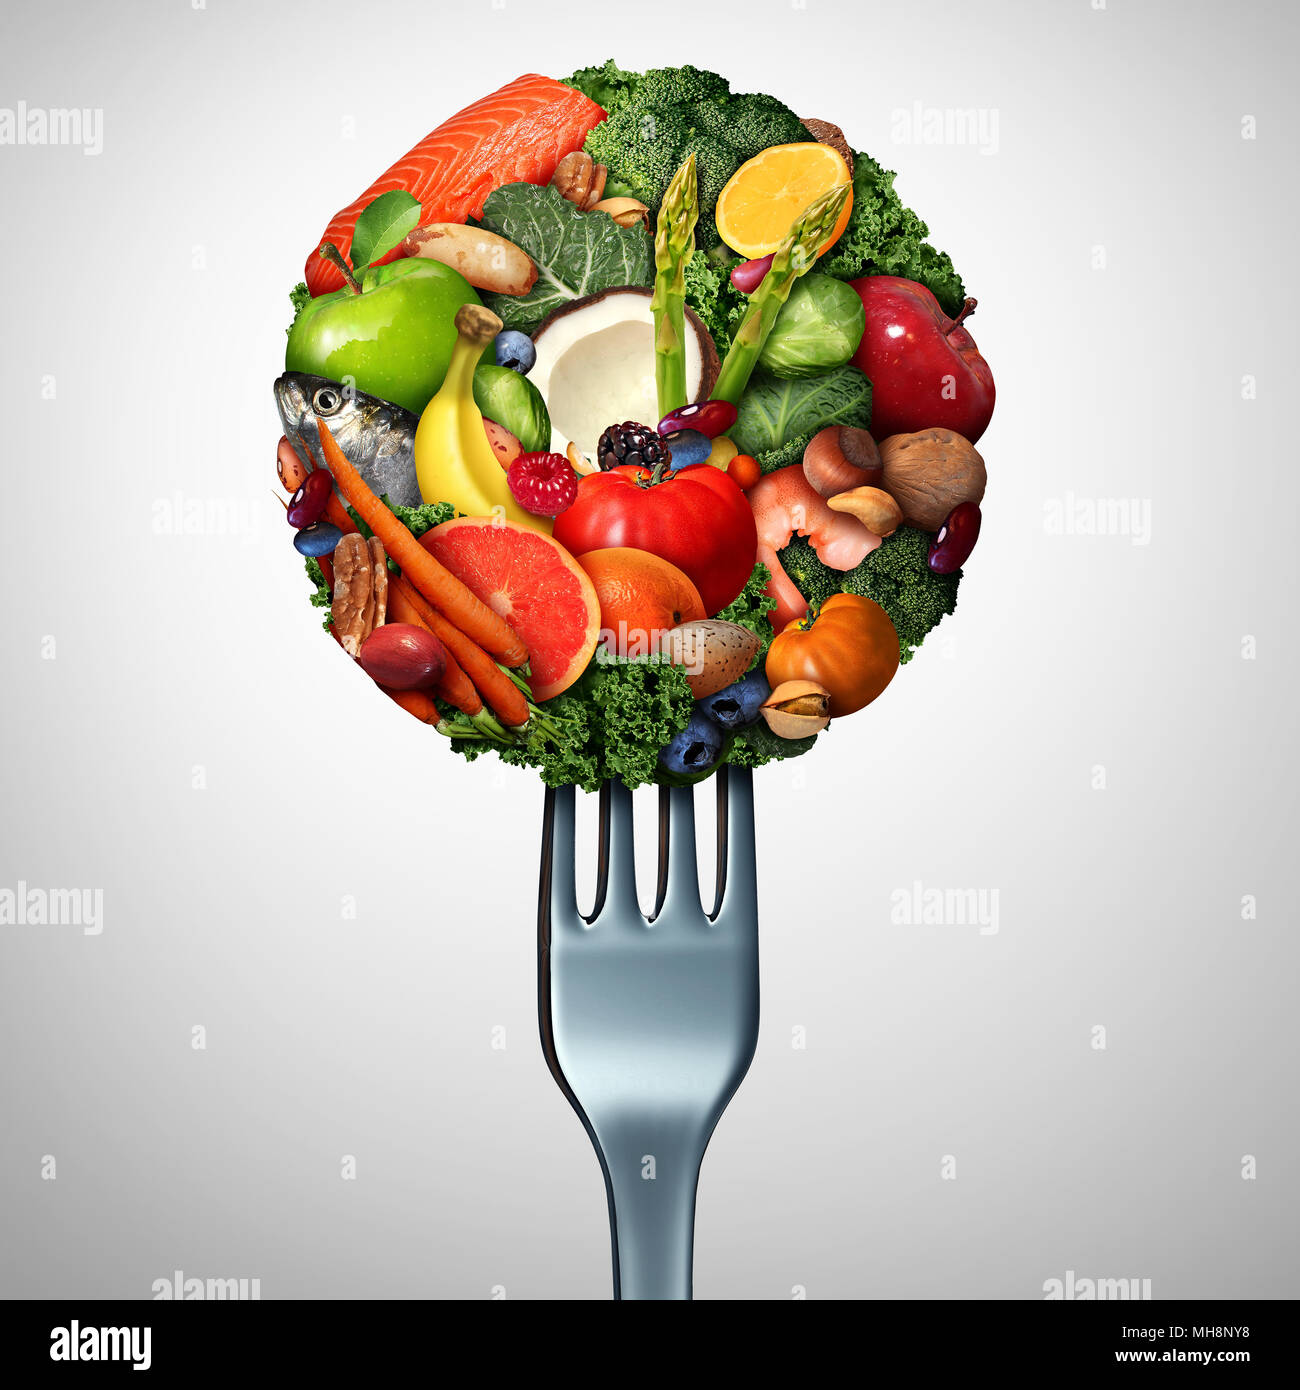 Healthy food idea with vegetables fruit nuts and nuts on a fork as a health lifestyle symbol with 3D illustration elements. Stock Photo